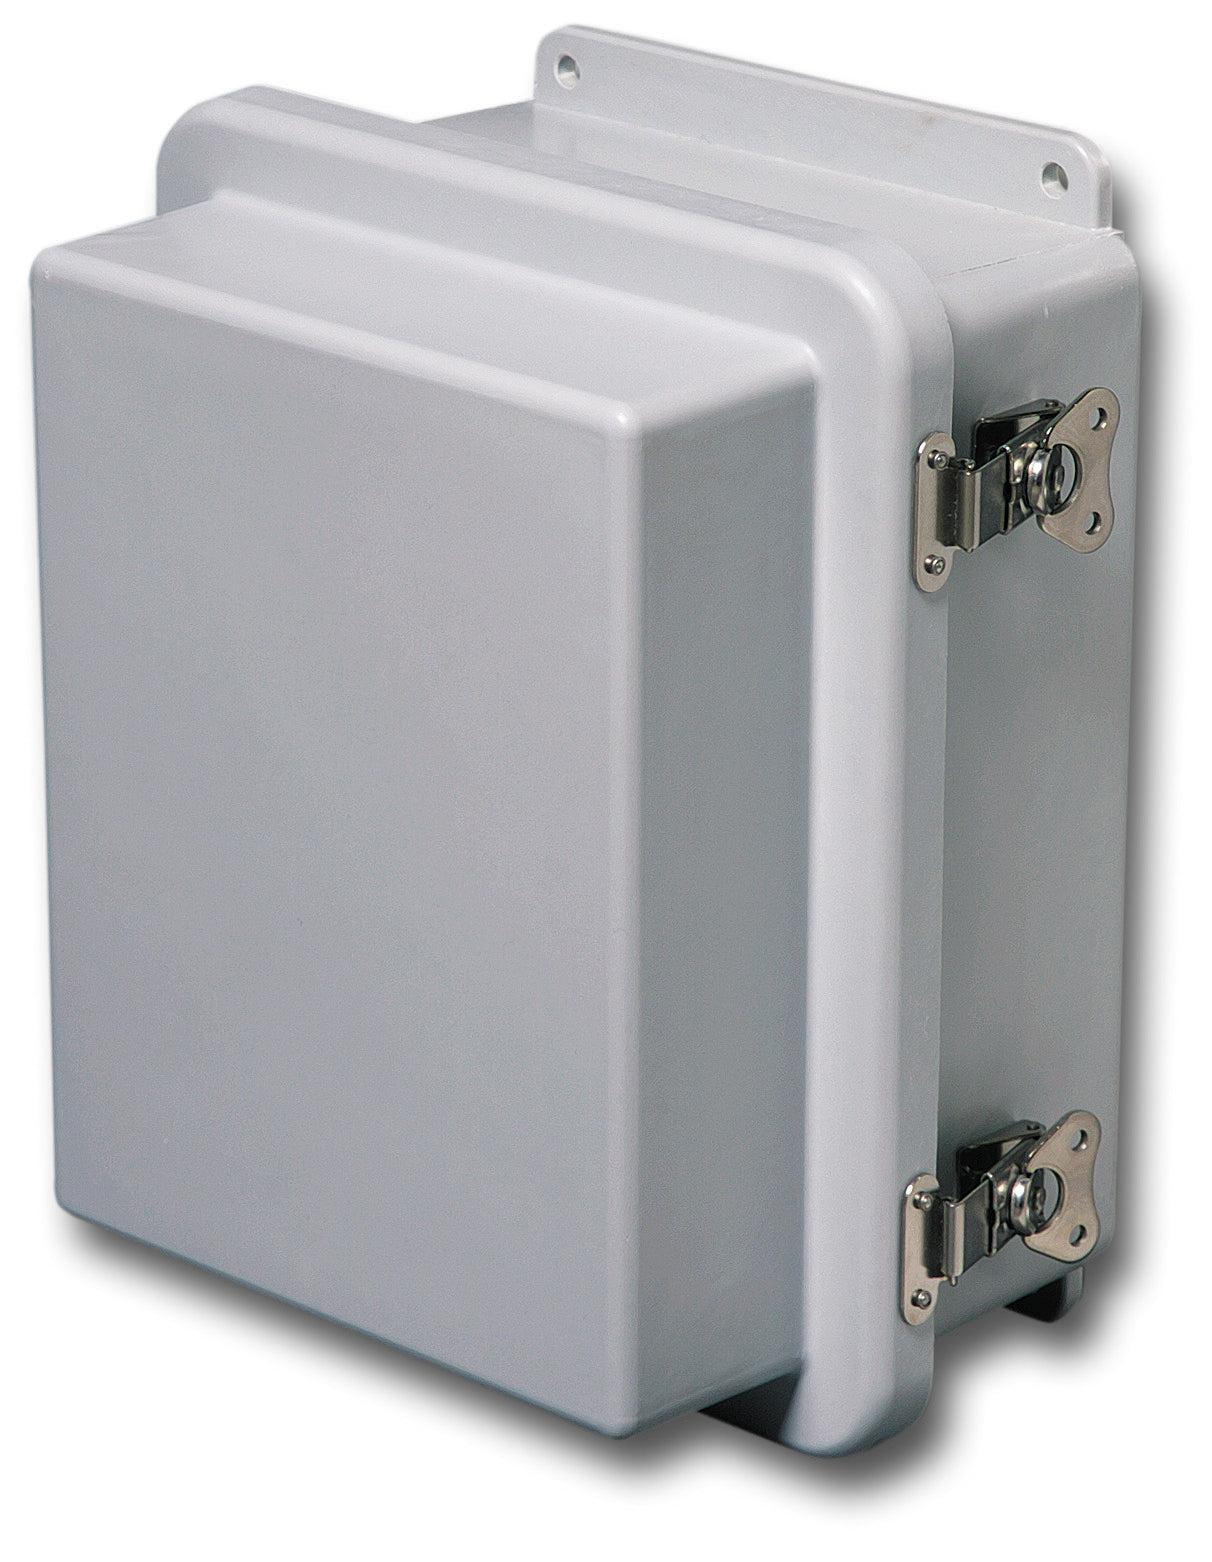 N4X   FG   RCHTL Series     Fiberglass Enclosures with Raised Hinged Cover and Twist Latch